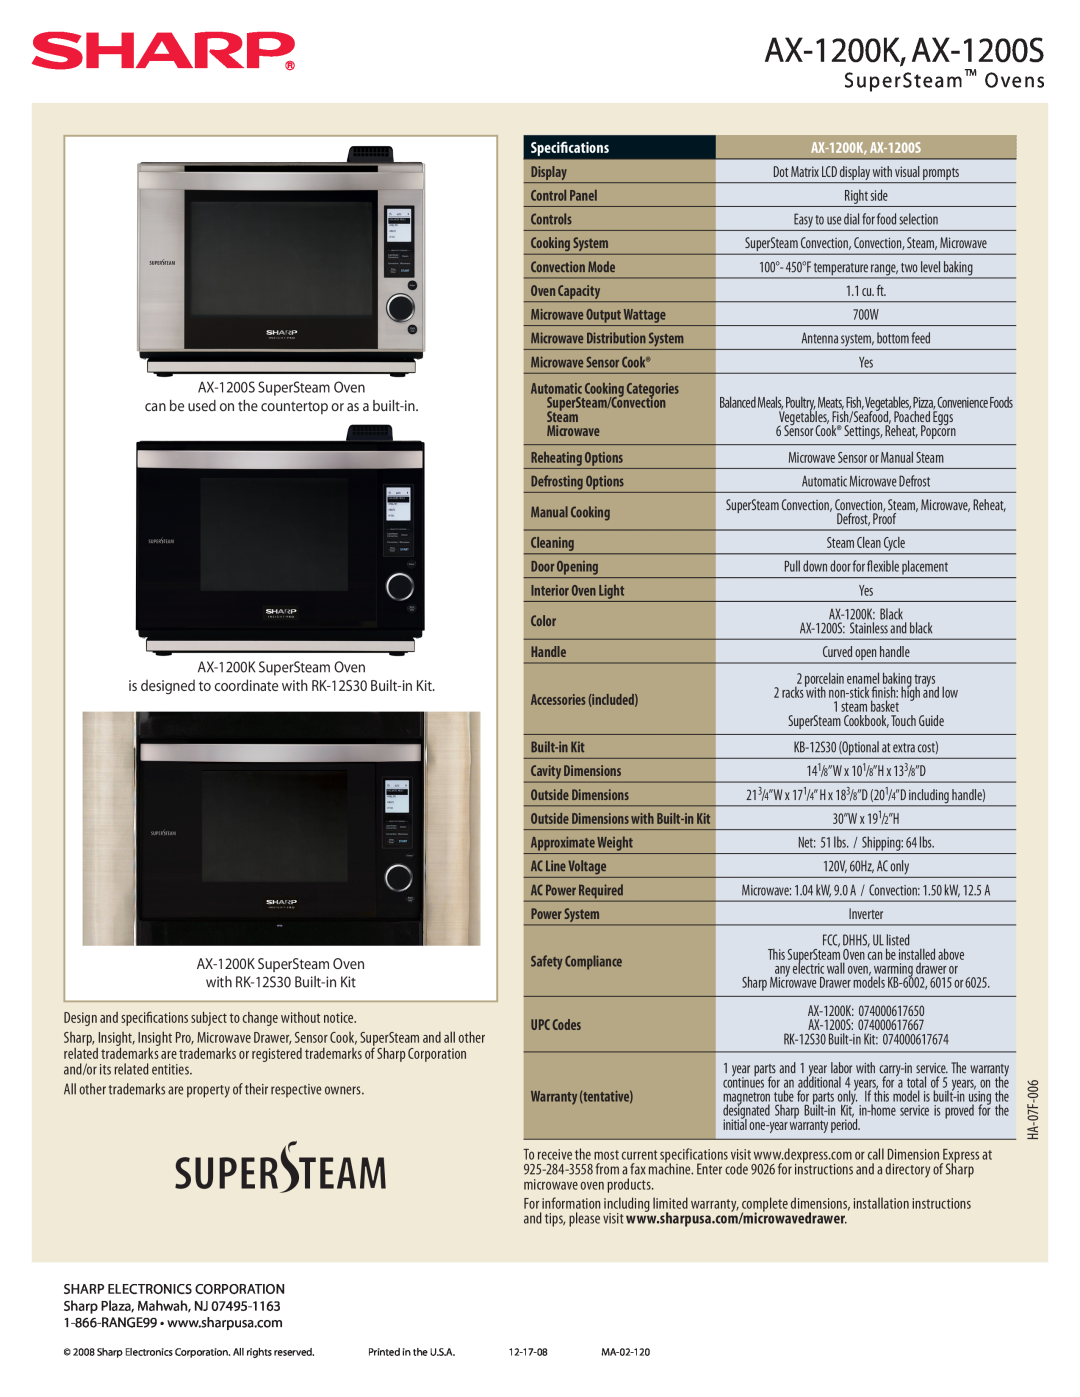 Sharp manual AX-1200K, AX-1200S, SuperSteam Ovens, Specifications 